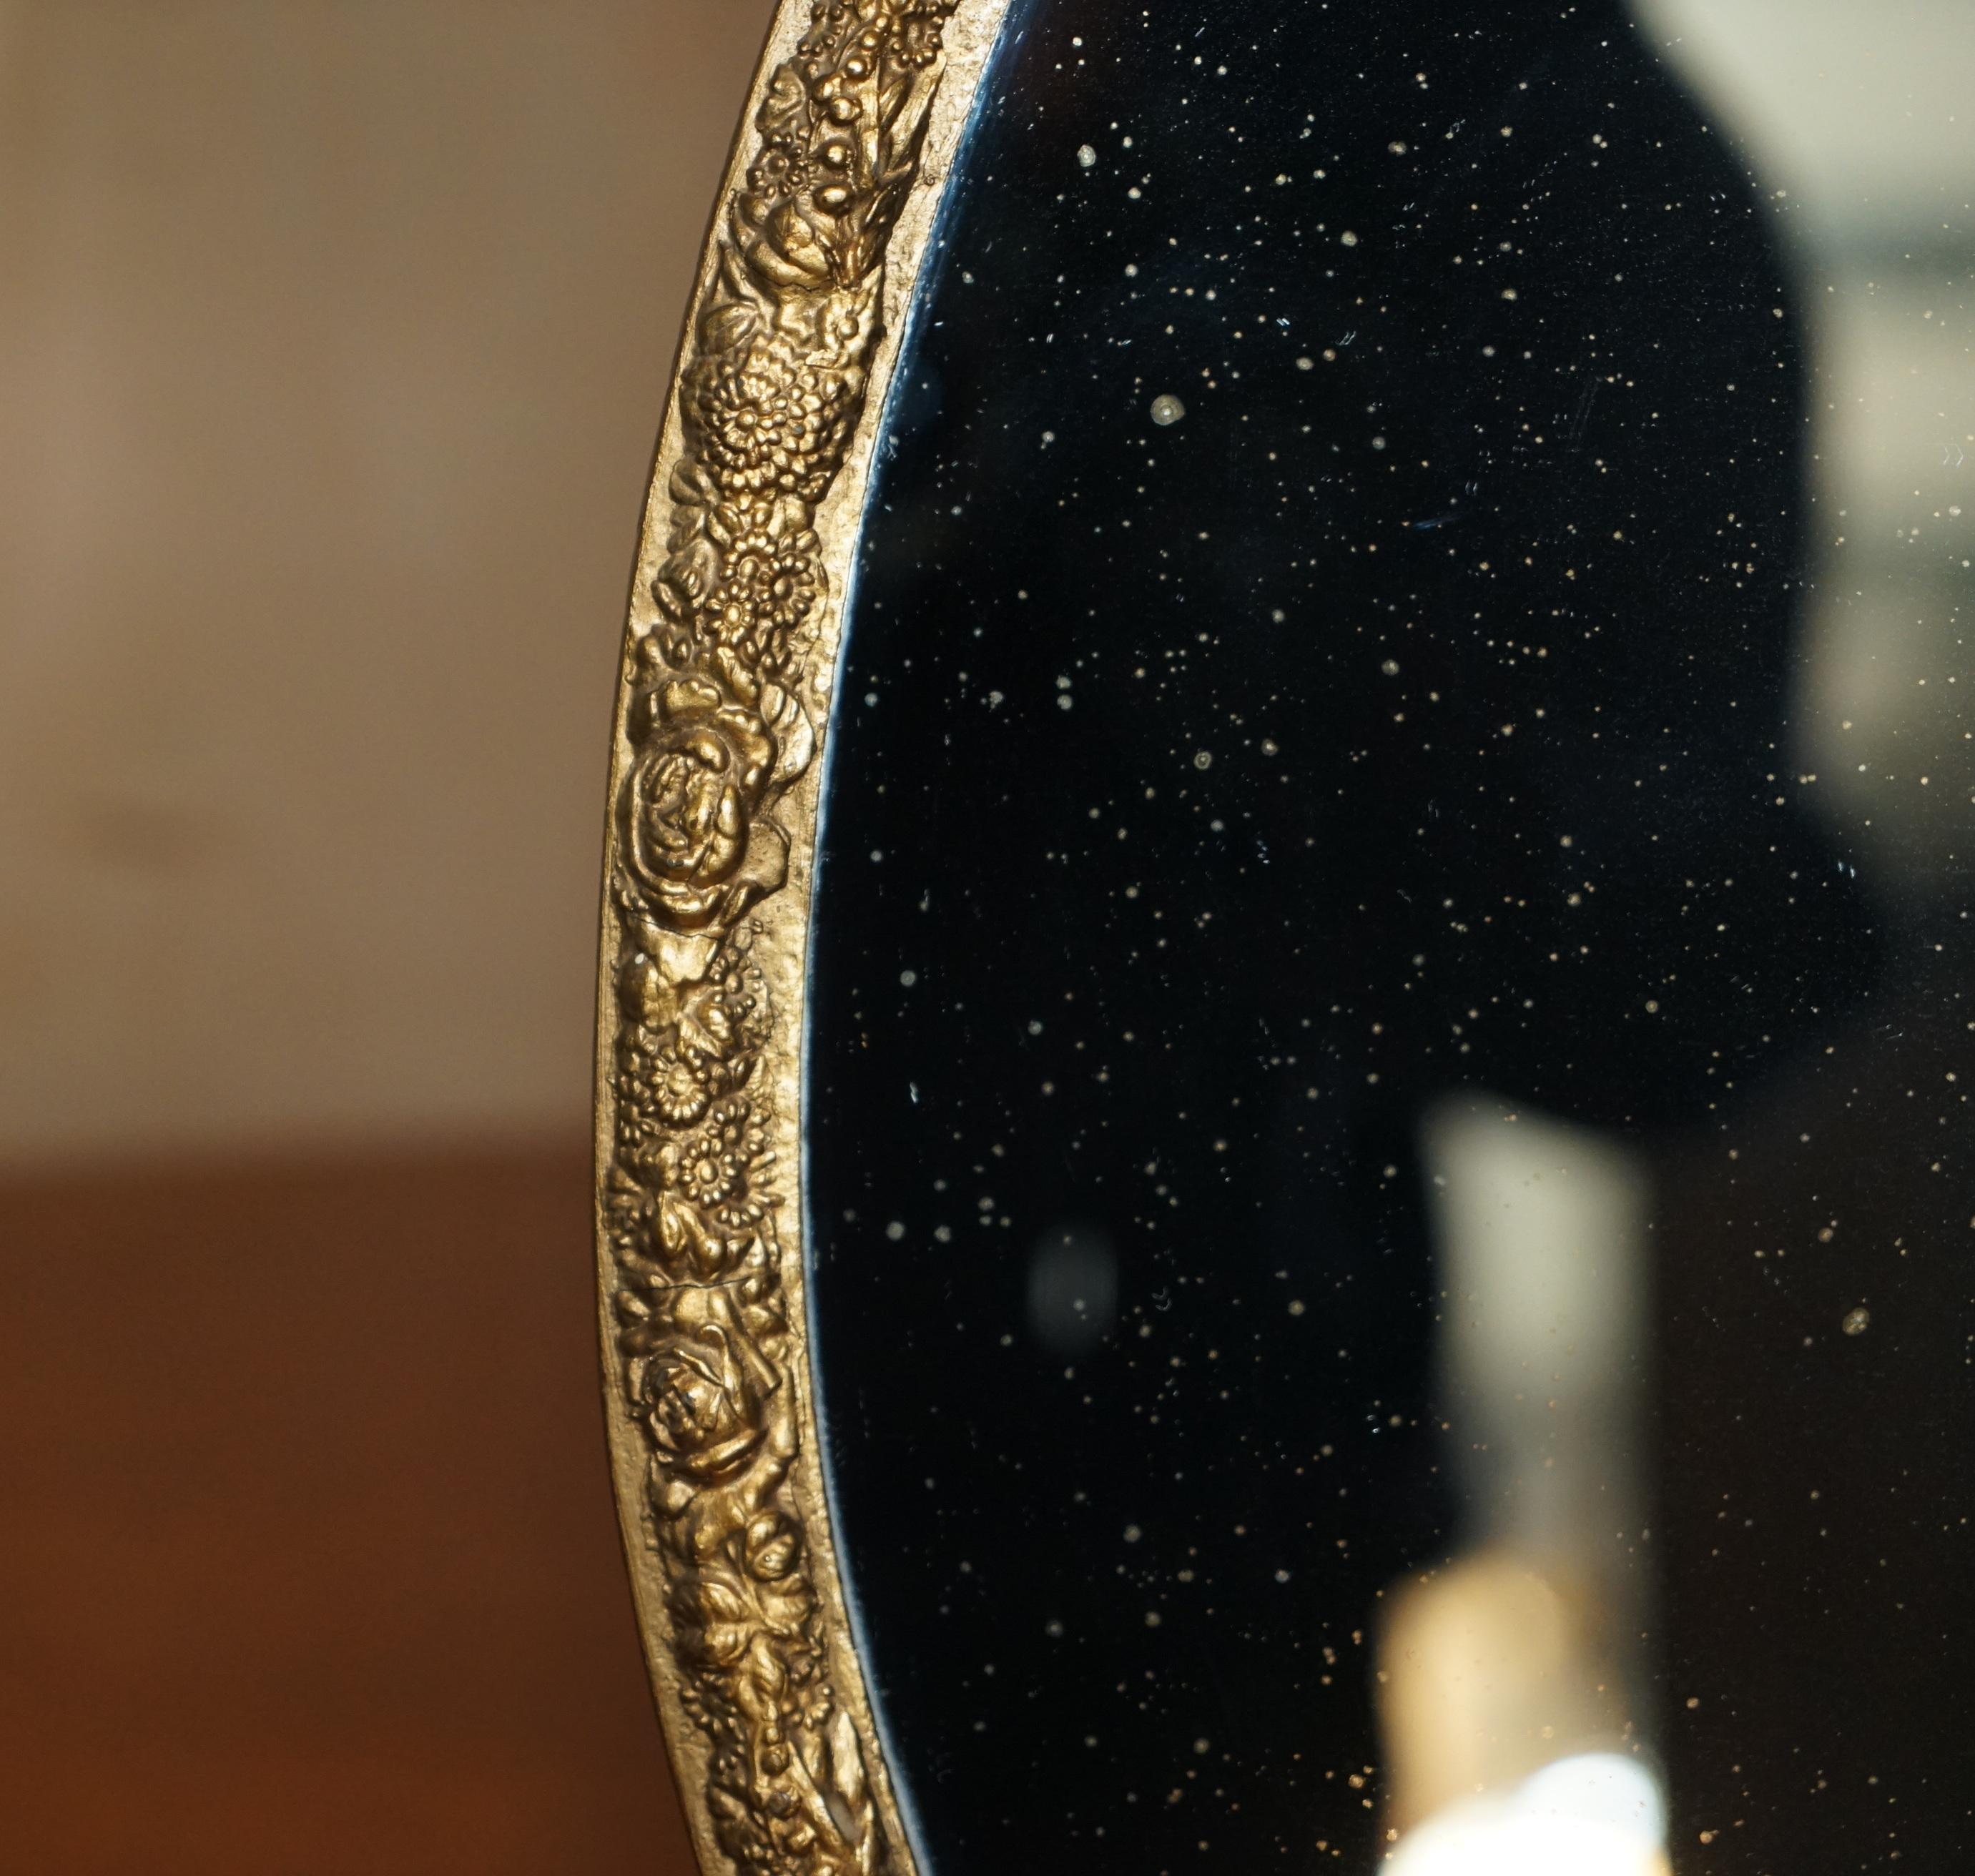 LOVELY ViNTAGE GILTWOOD FRAMED TABLE TOP MIRROR MIT STAND FOR A DRESSING TABLE (Englisch) im Angebot